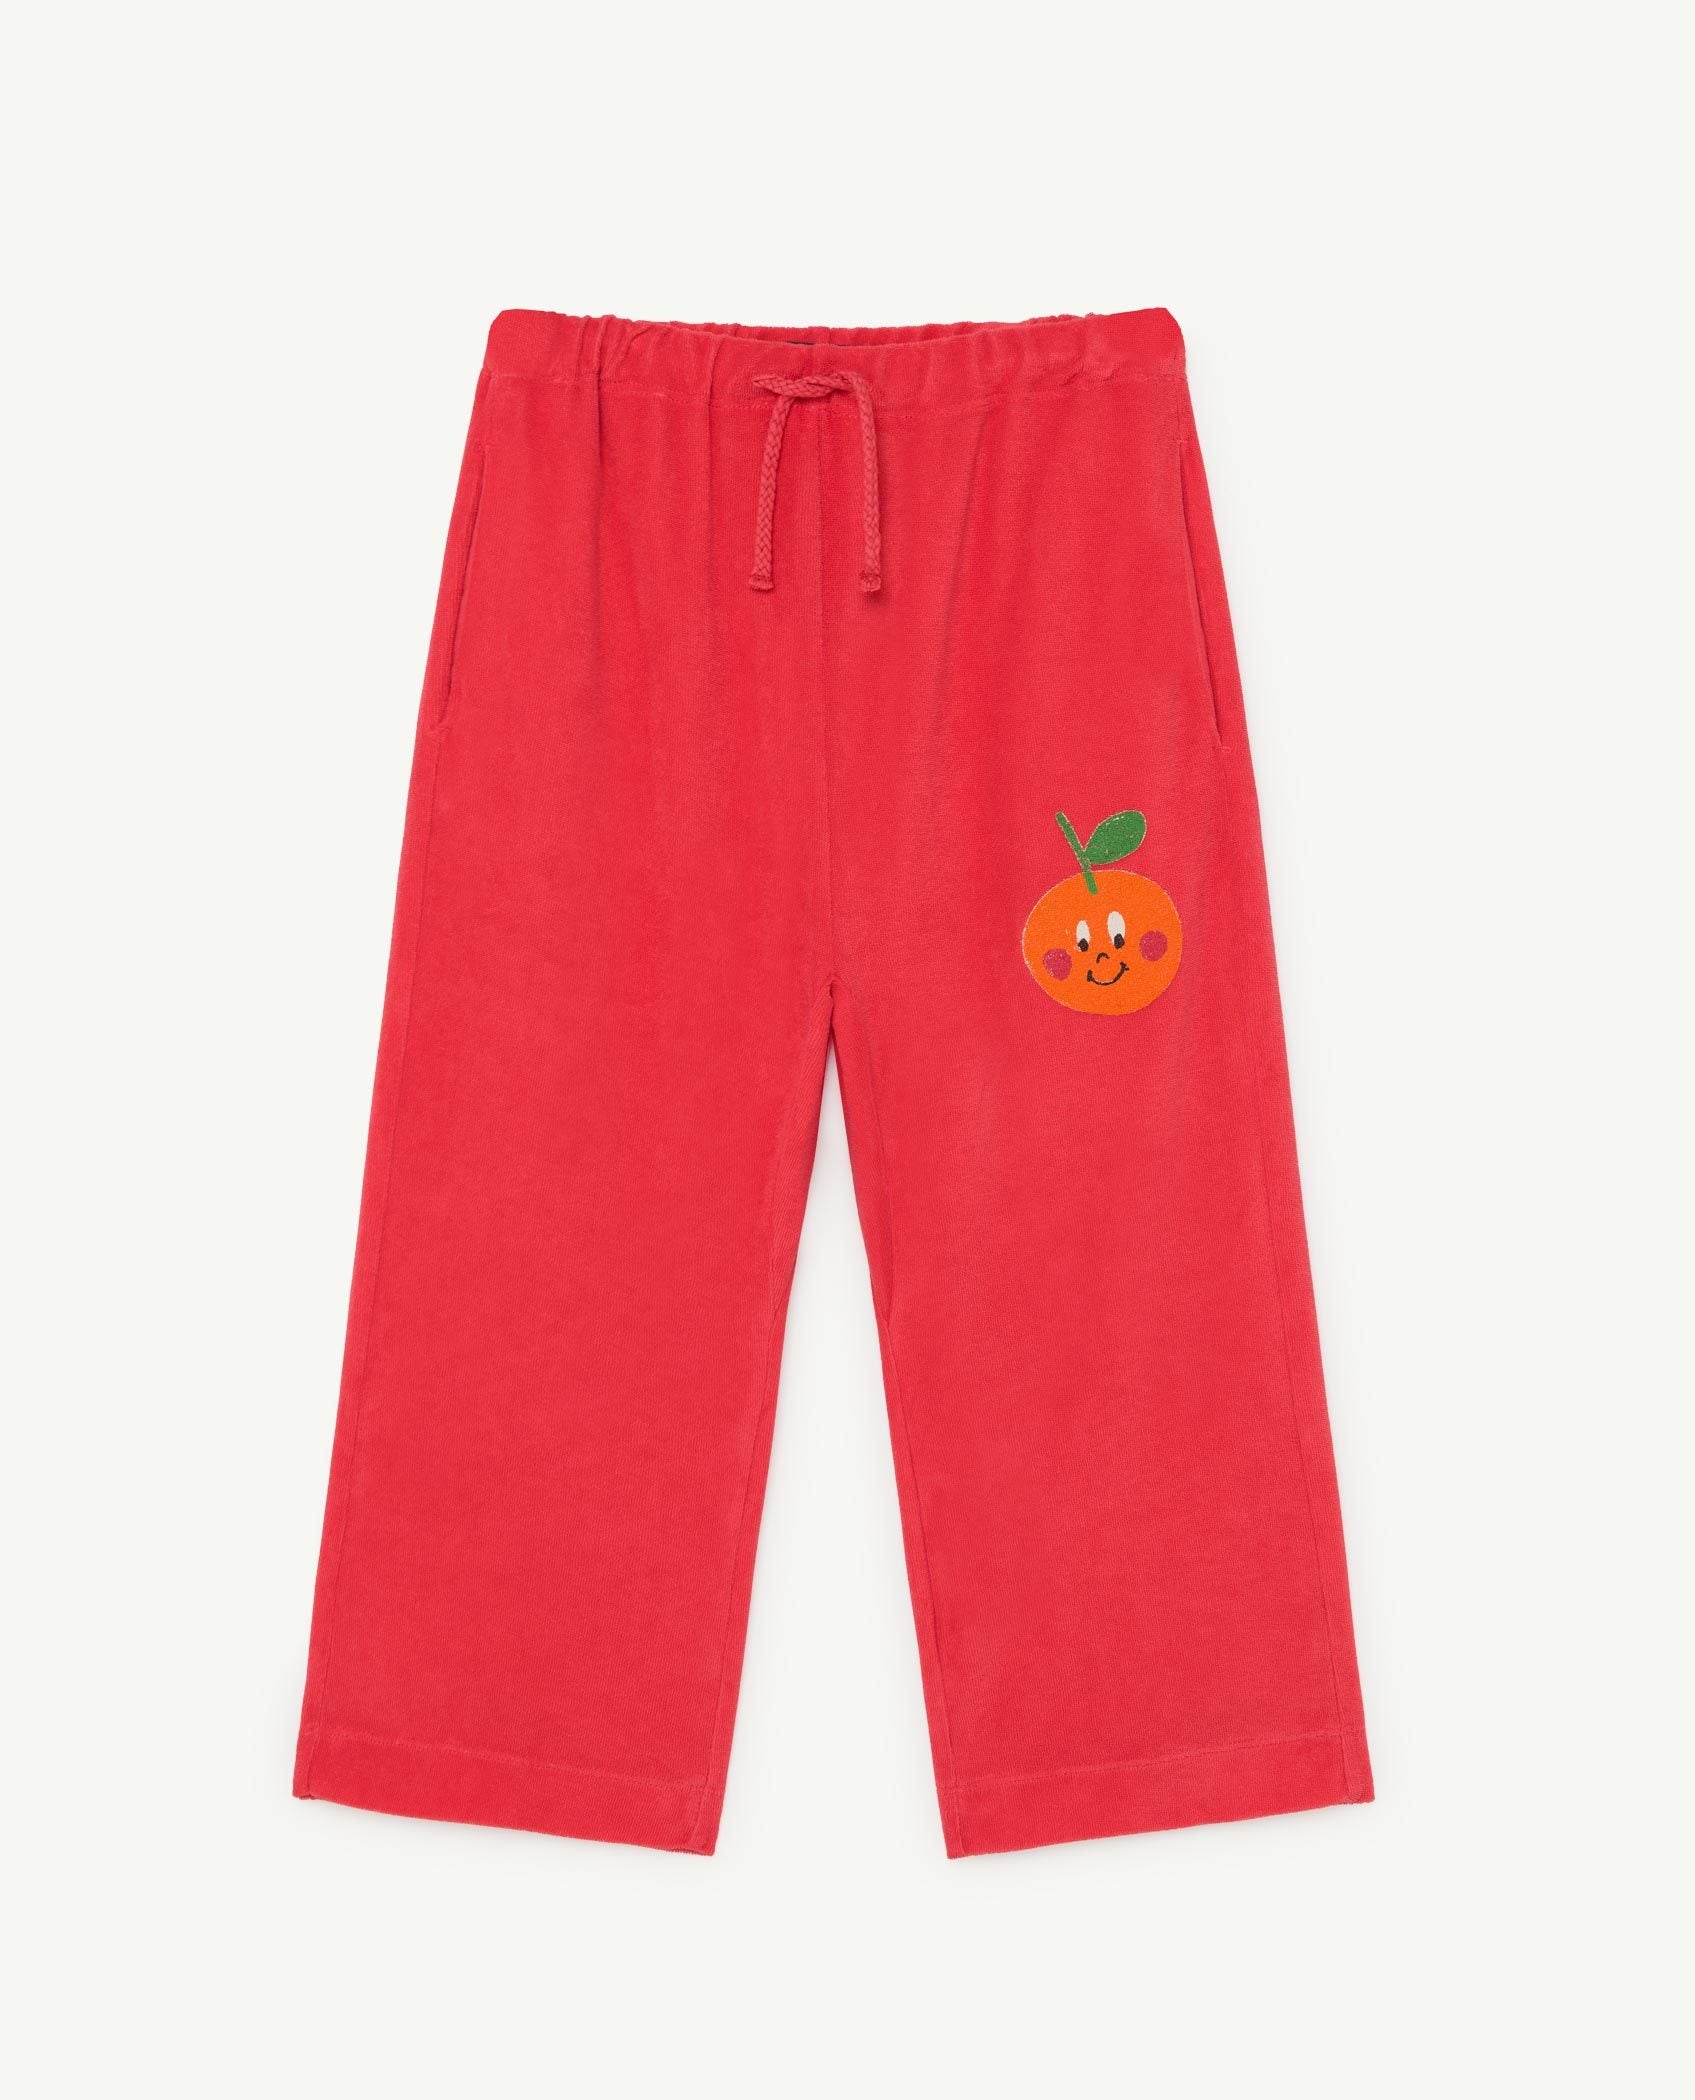 Red Porcupine Pants PRODUCT FRONT